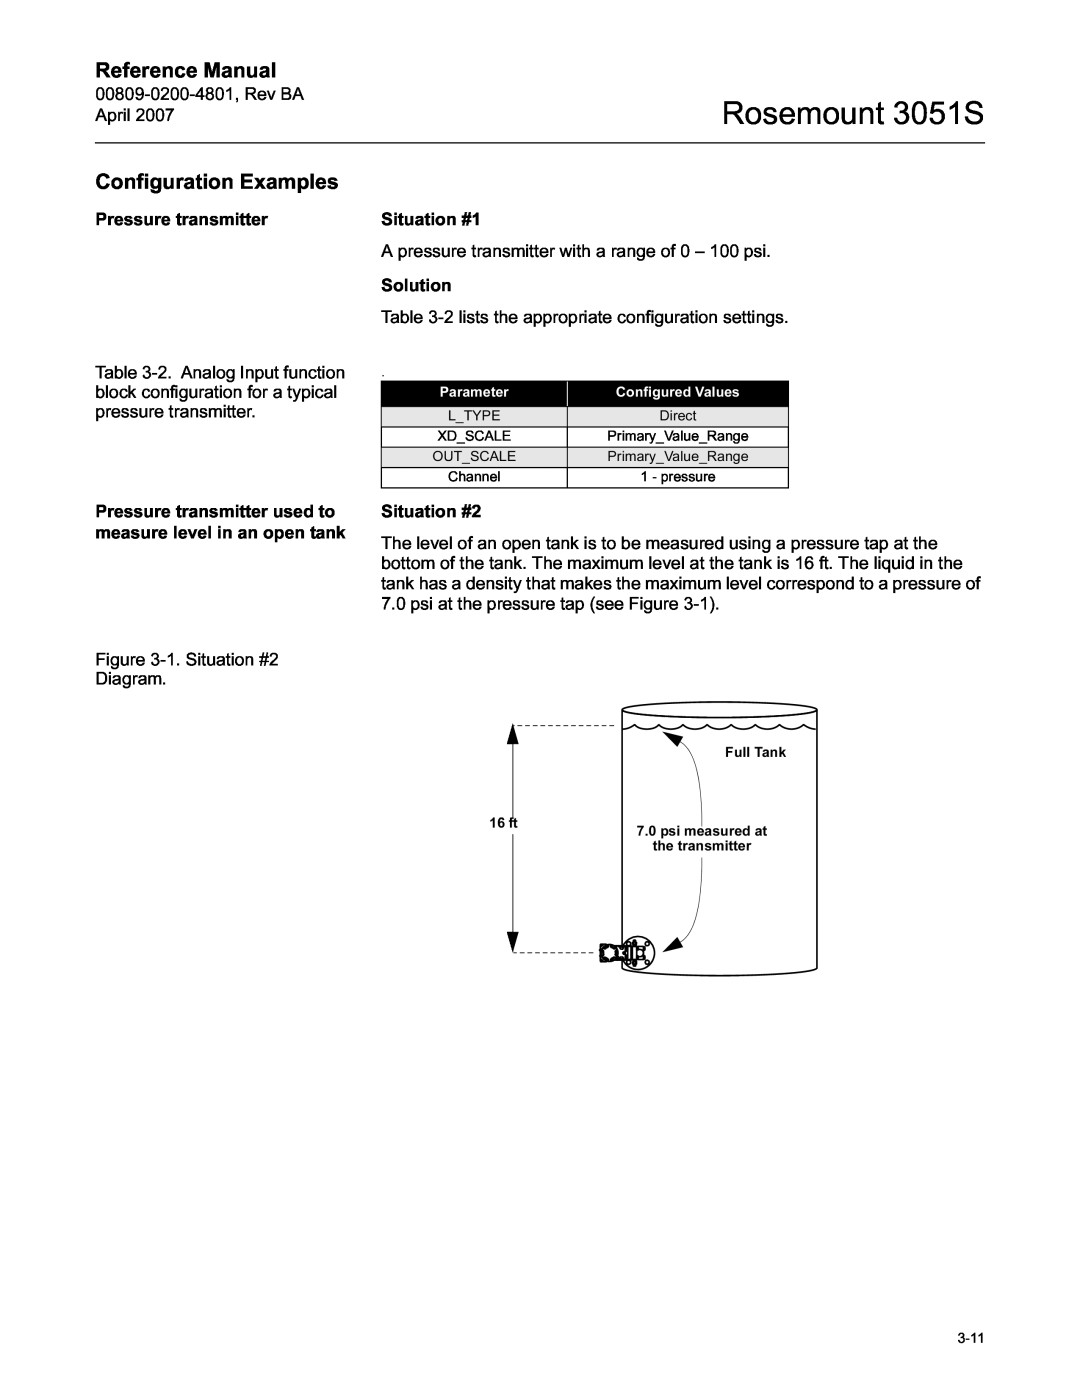 Emerson manual Configuration Examples, Rosemount 3051S, Reference Manual, Parameter, Configured Values, pressure 